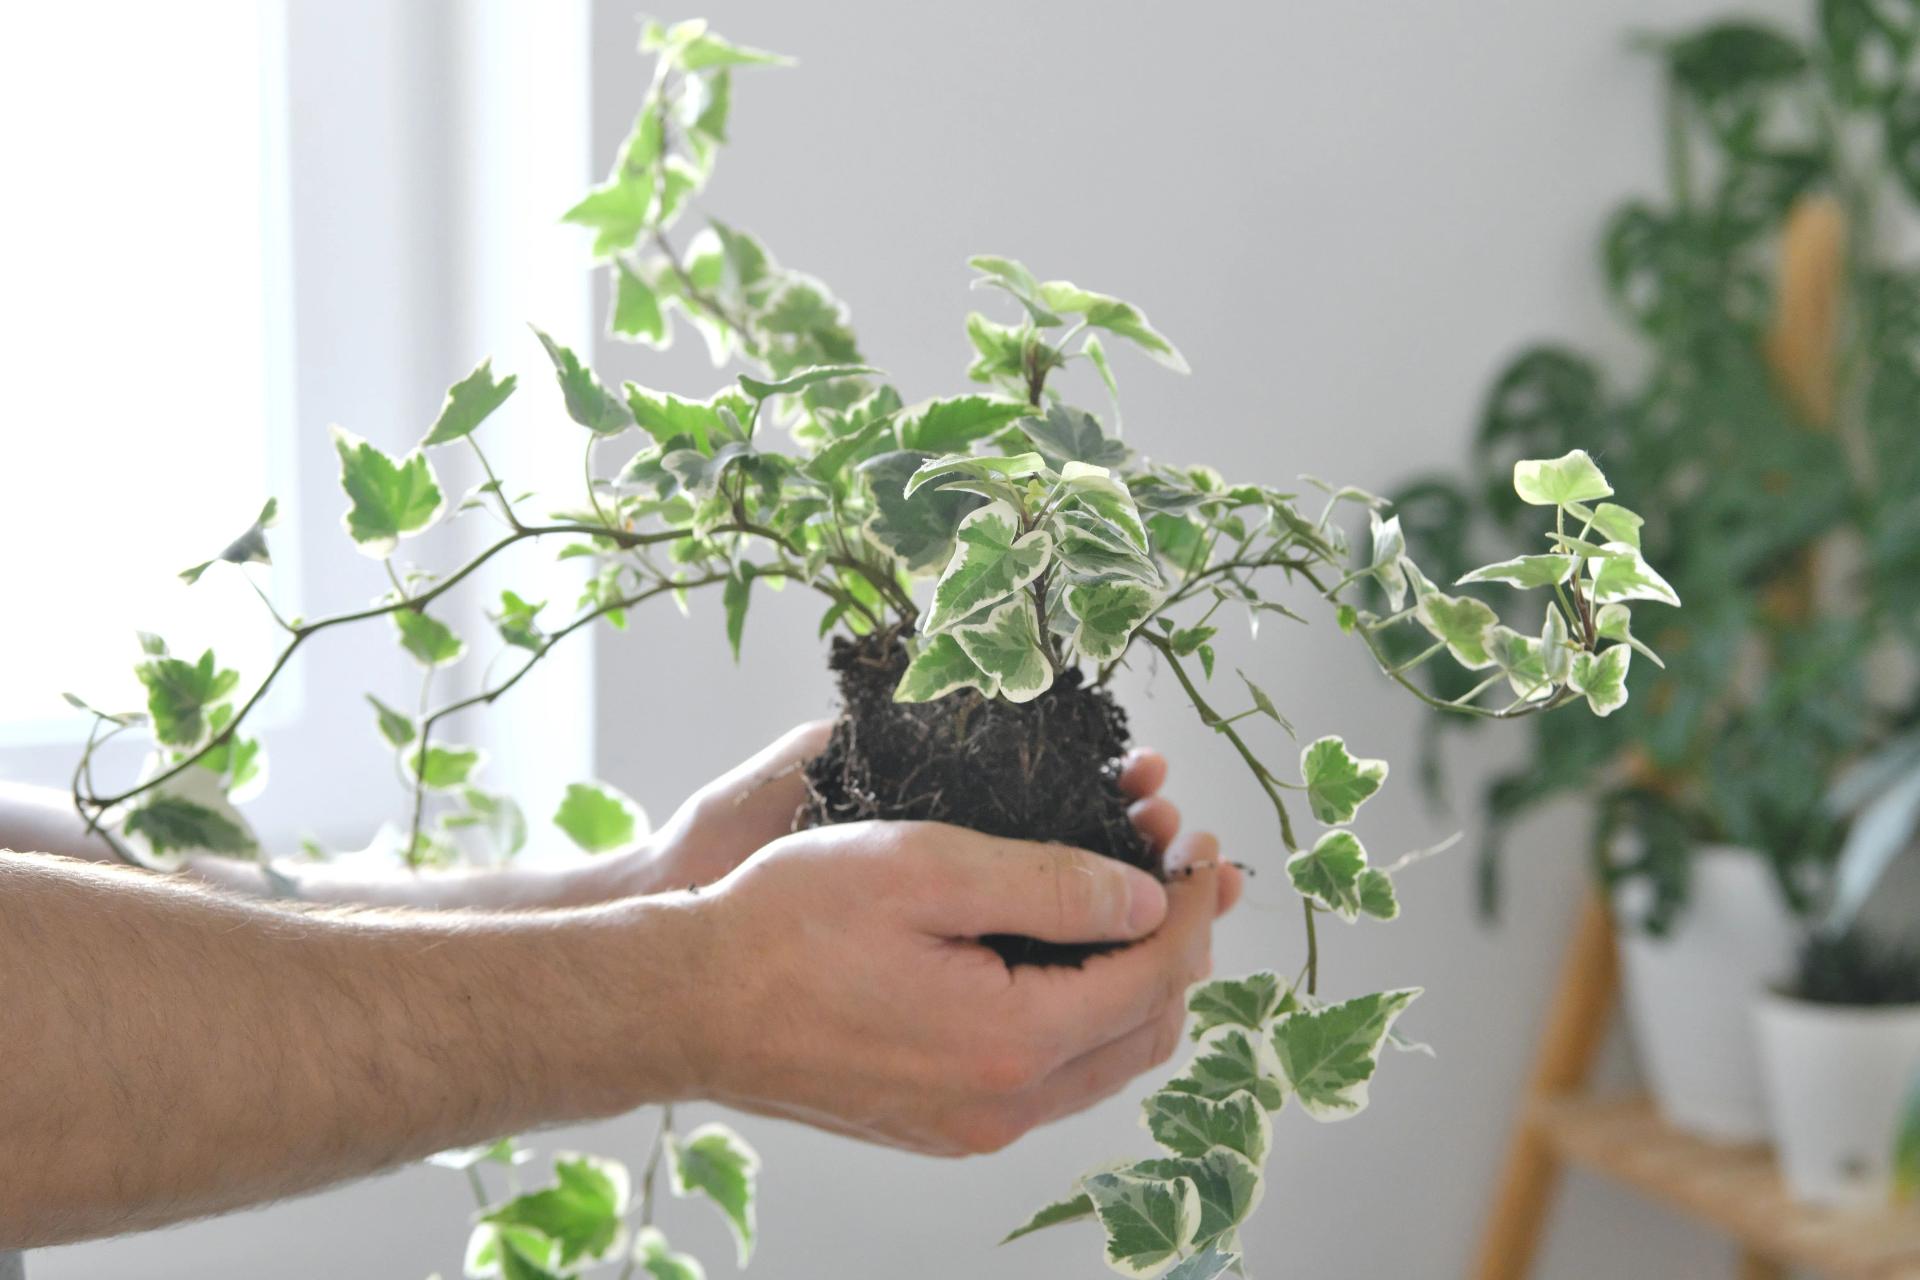 Hedera Plant in Hands